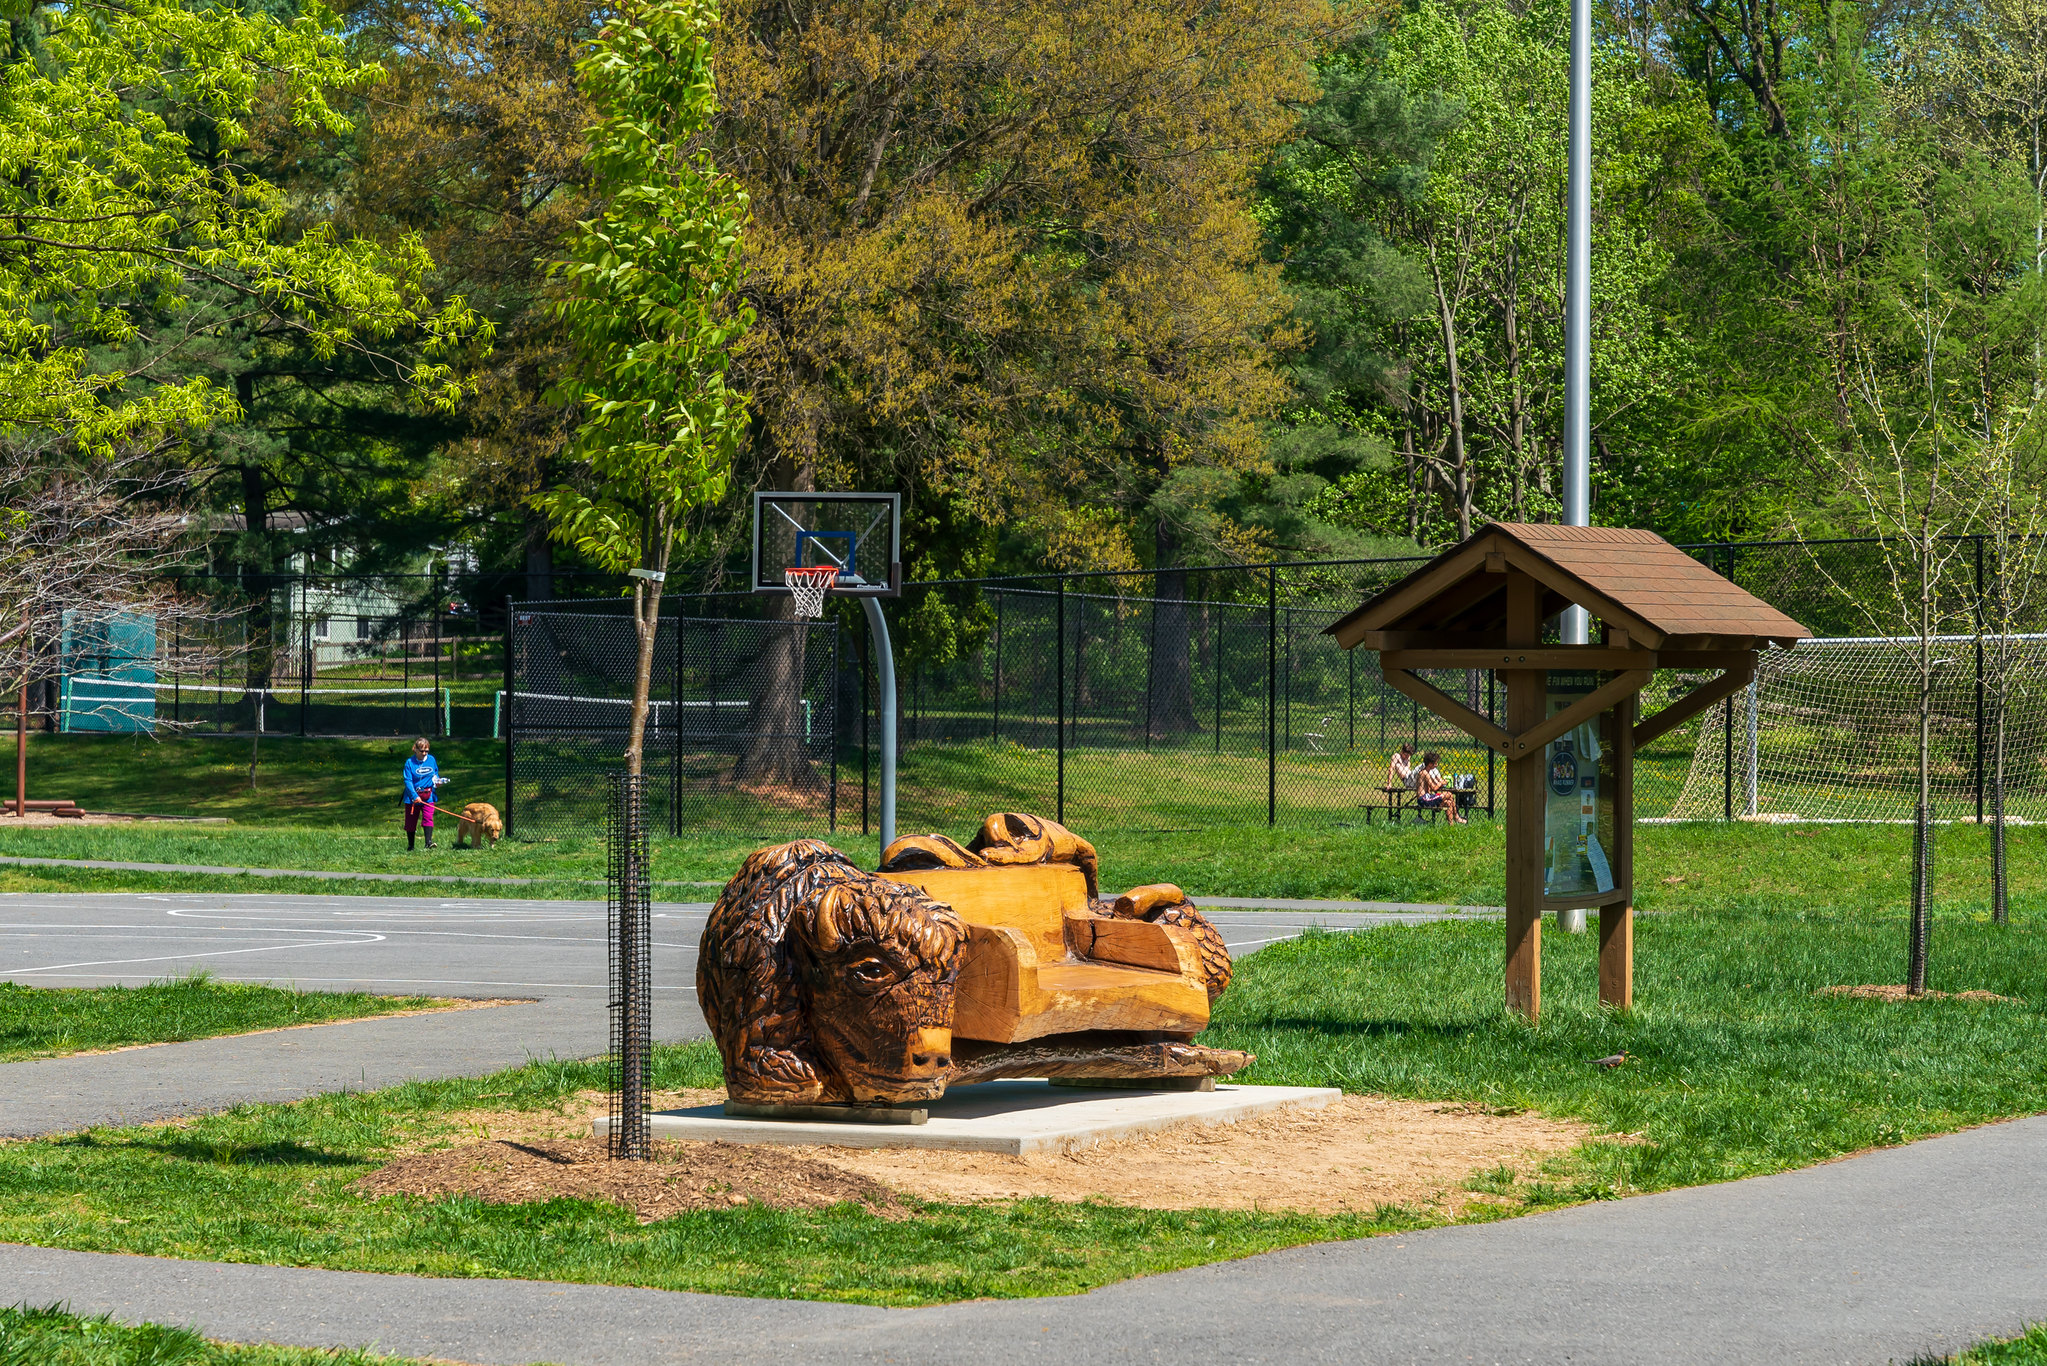 Ken-Gar Palisades Park includes a bench carved out of oak depicting a bison, a basketball hoop, trails, kiosk and fenced field in the background.